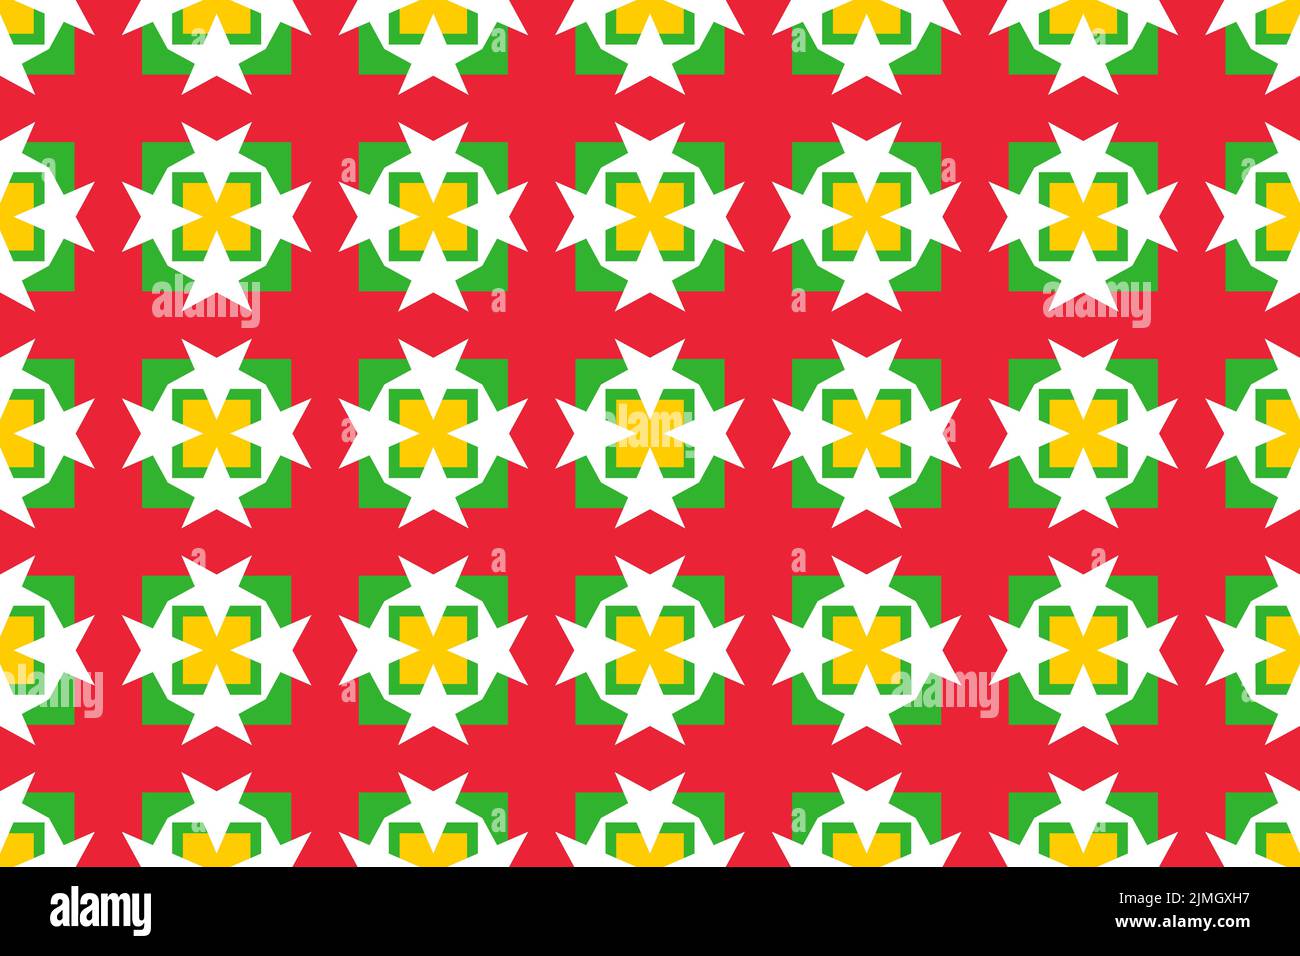 Geometric pattern in the colors of the national flag of Myanmar. The colors of Myanmar. Stock Photo